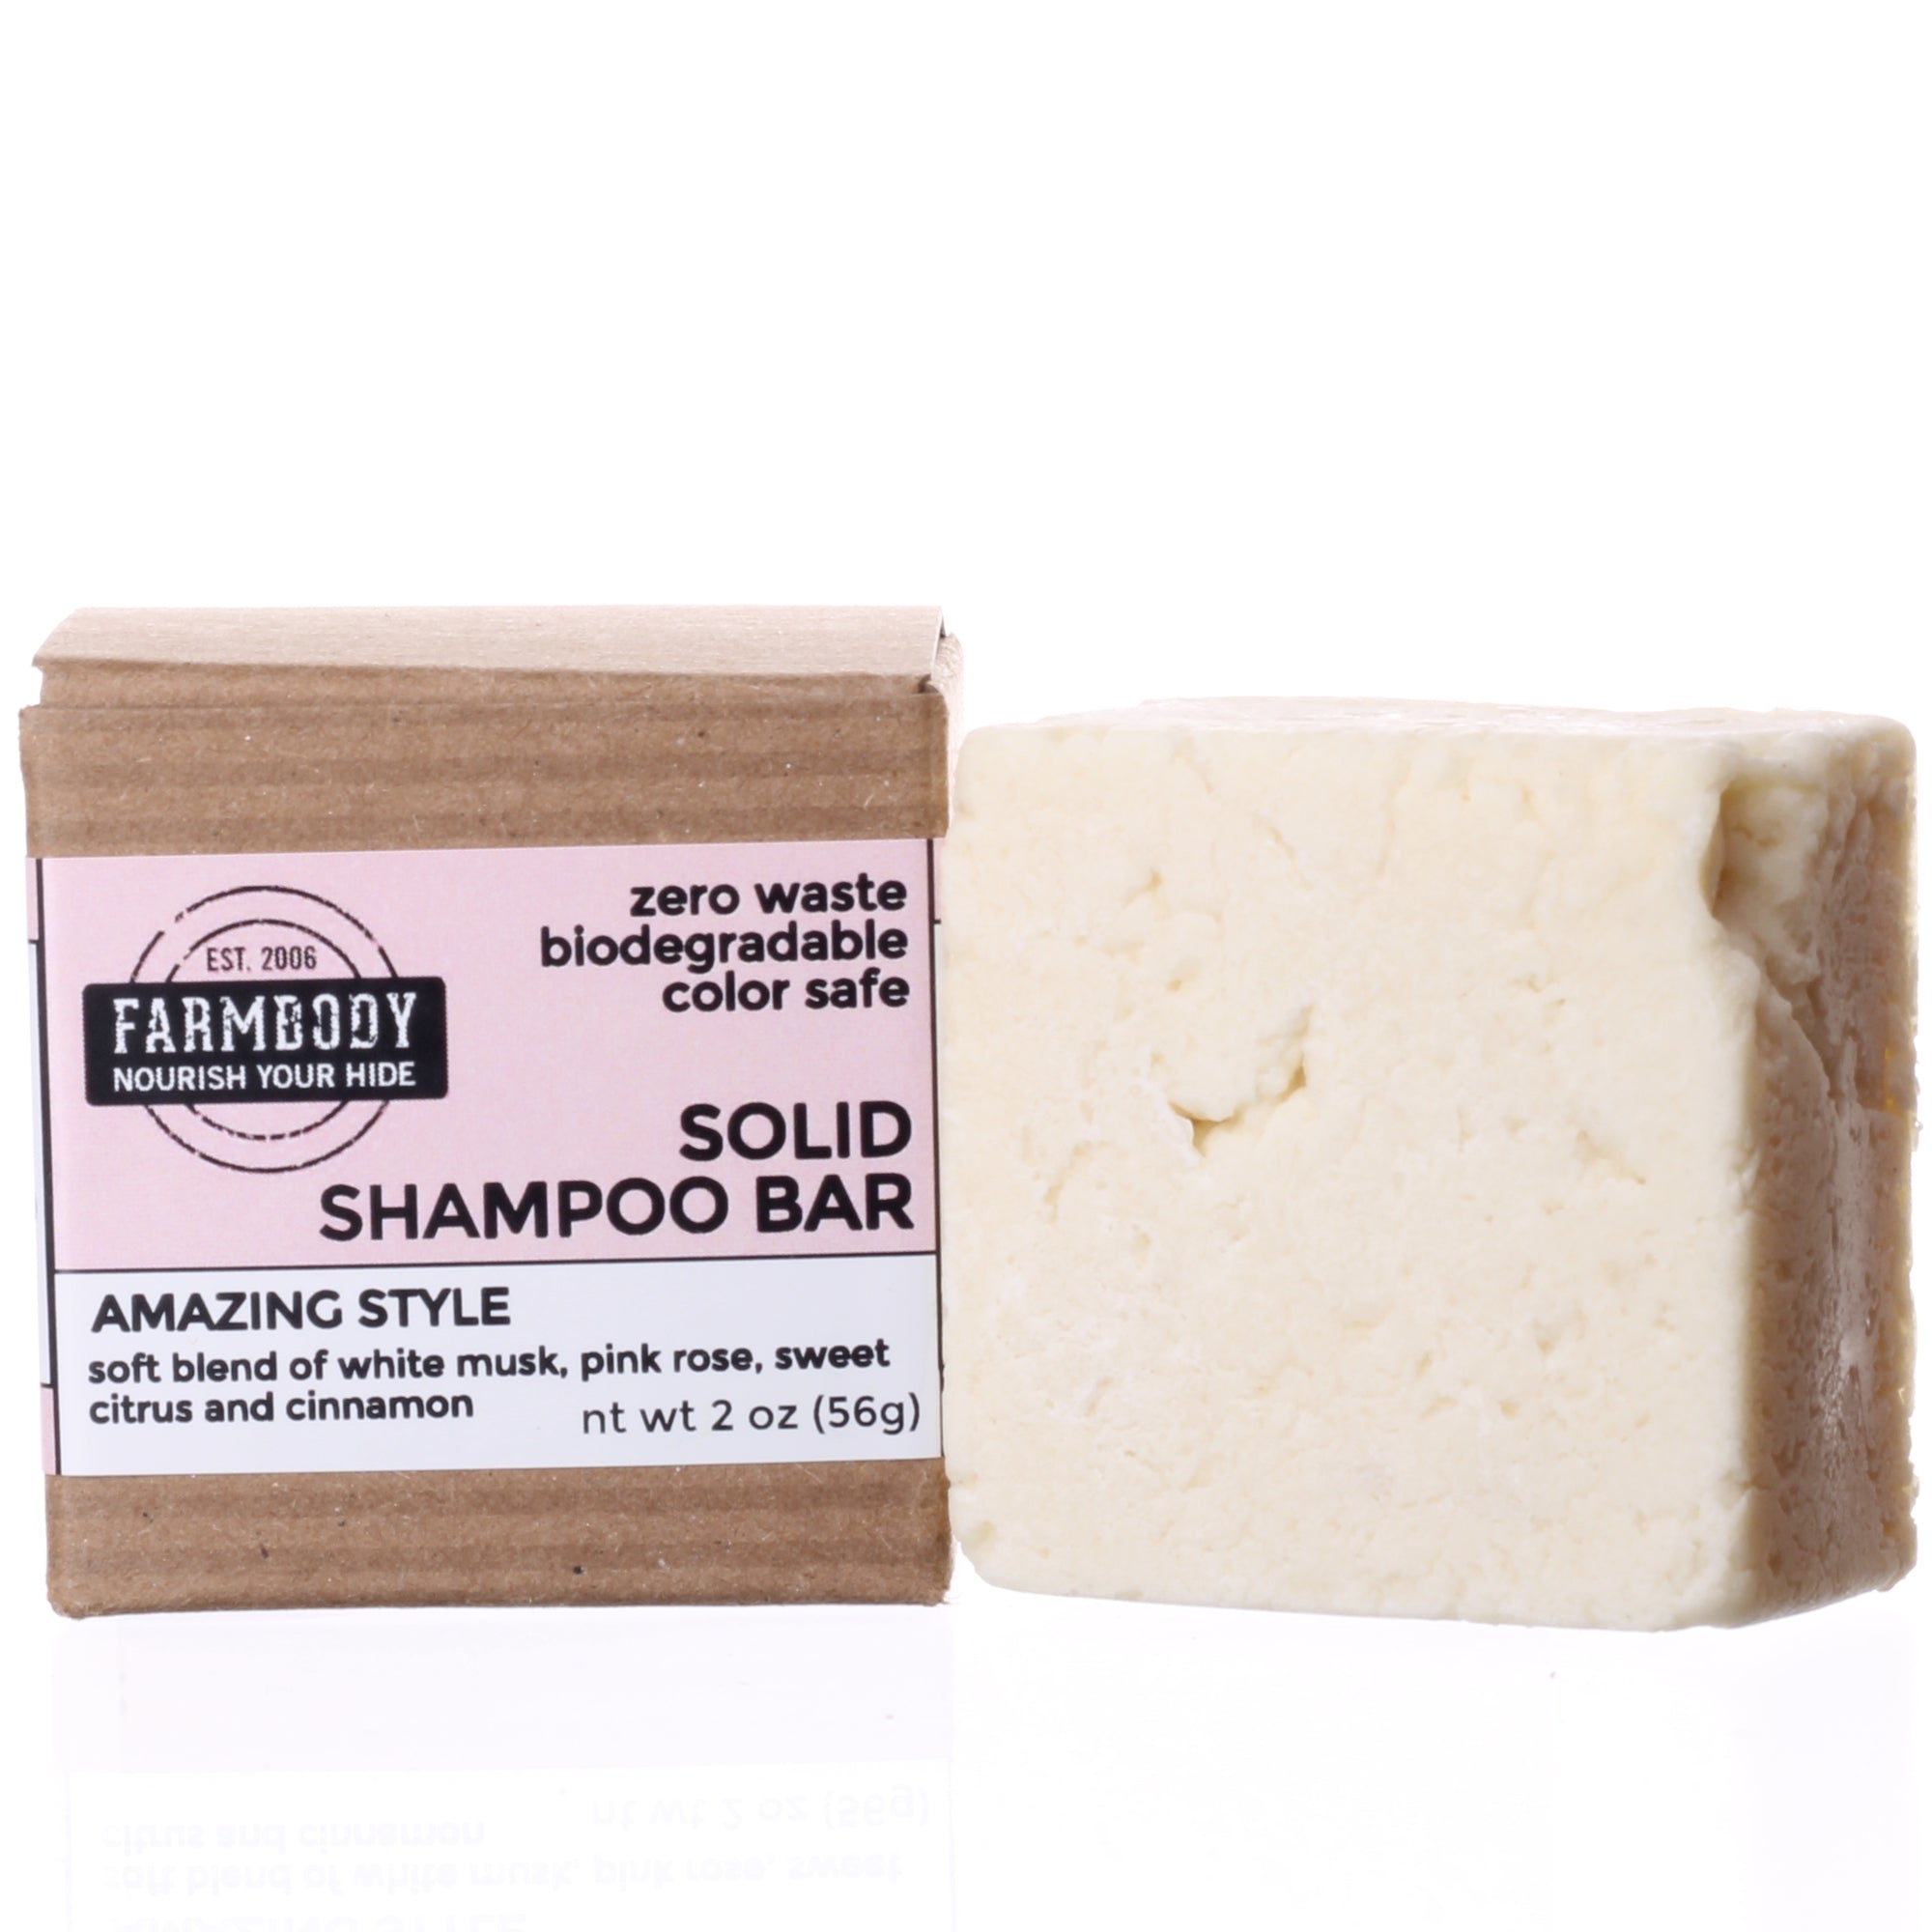 Farmbody zero waste solid shampoo bar for color treated hair free of cocomidopropyl betaine